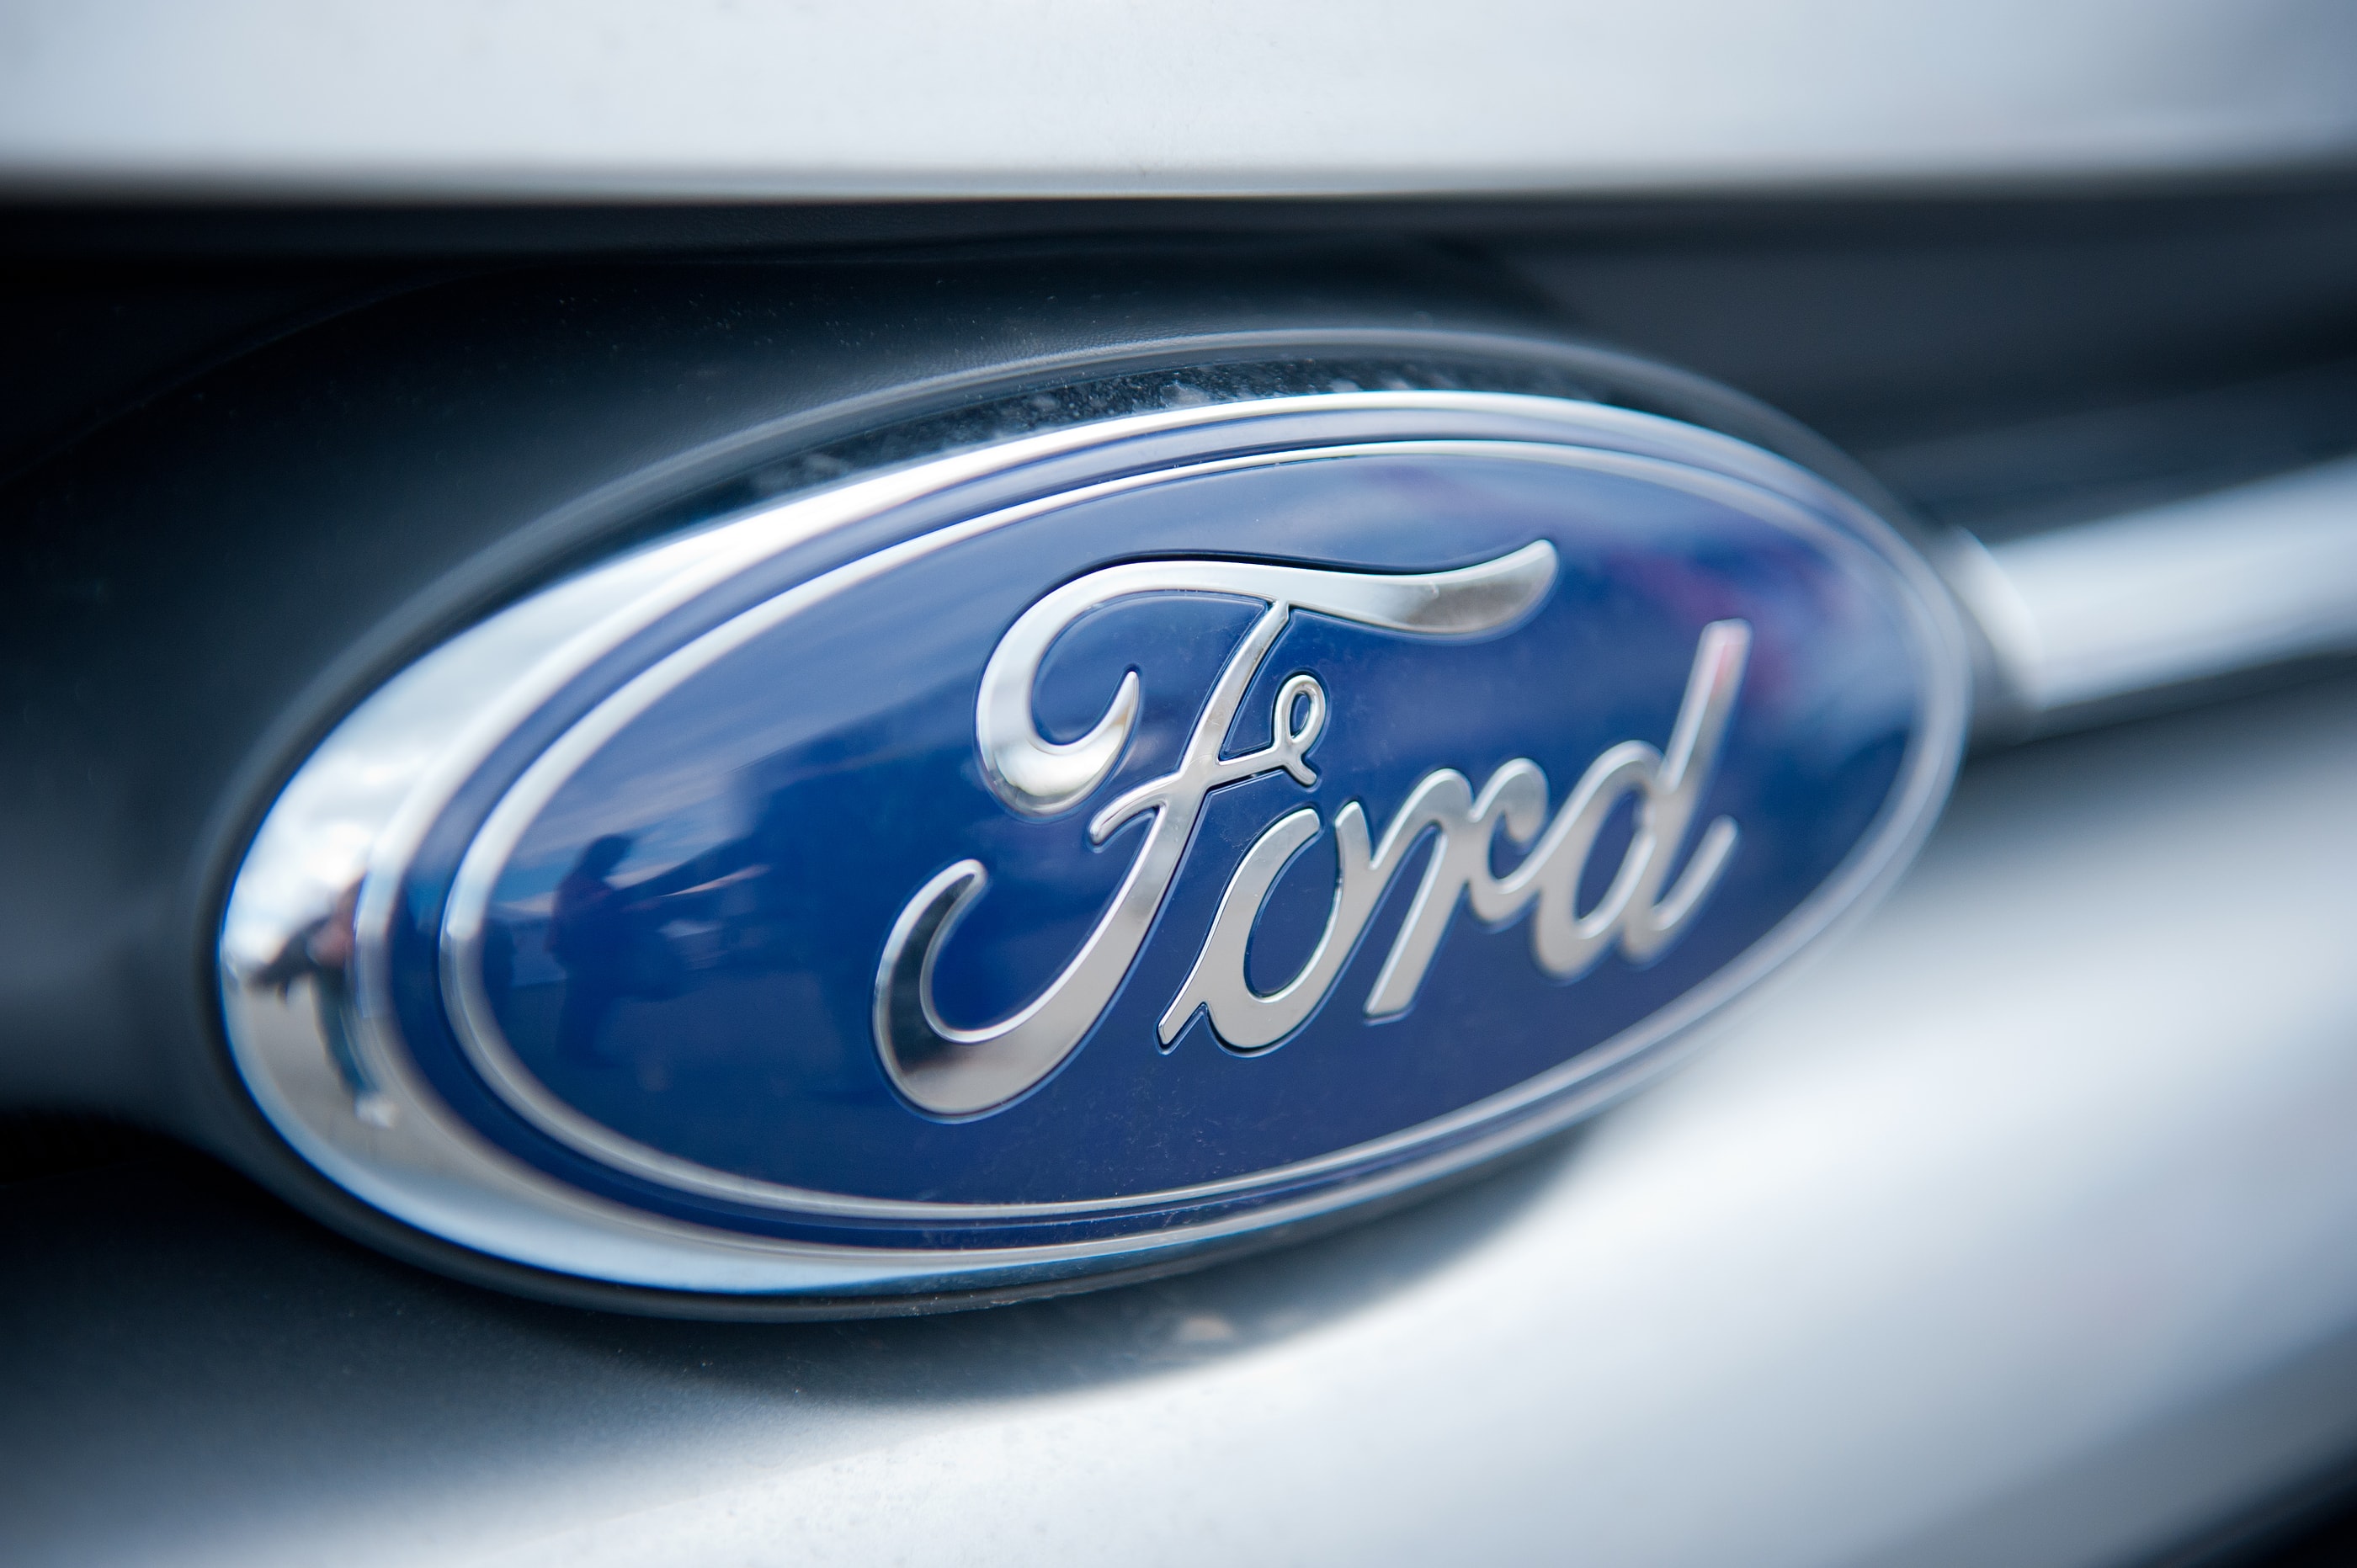 Ford set to invest £3 billion into electric vehicles